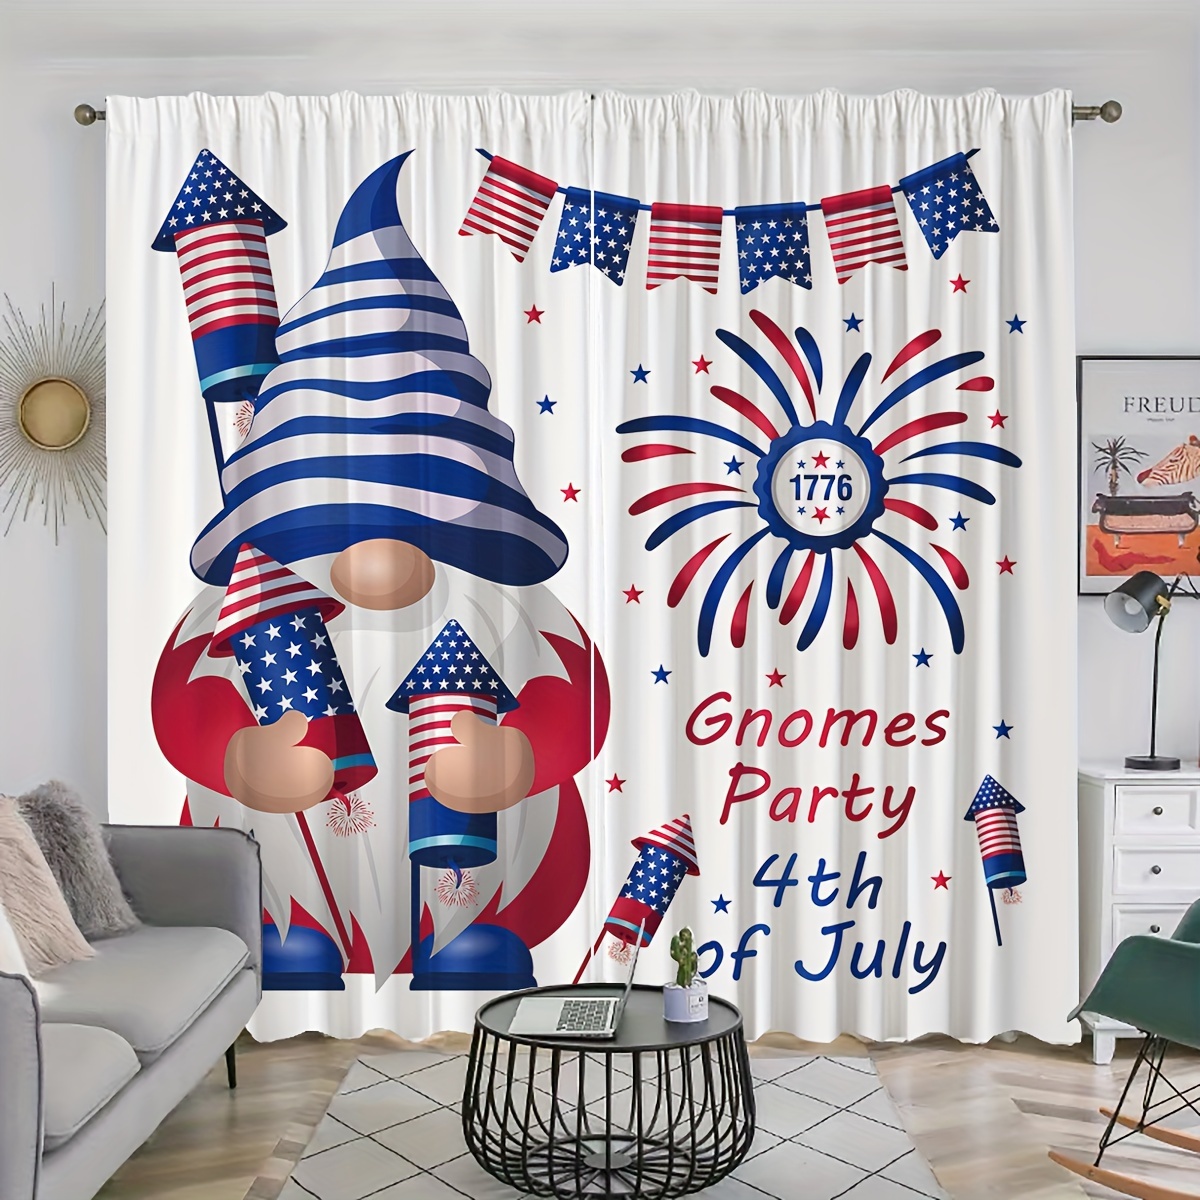 

2pcs Gnome Handheld Fireworks Celebration Independence Day Curtains, Rod Pocket Curtain, Suitable For Restaurant Public Place Living Room Bedroom Office Study, Home Decor